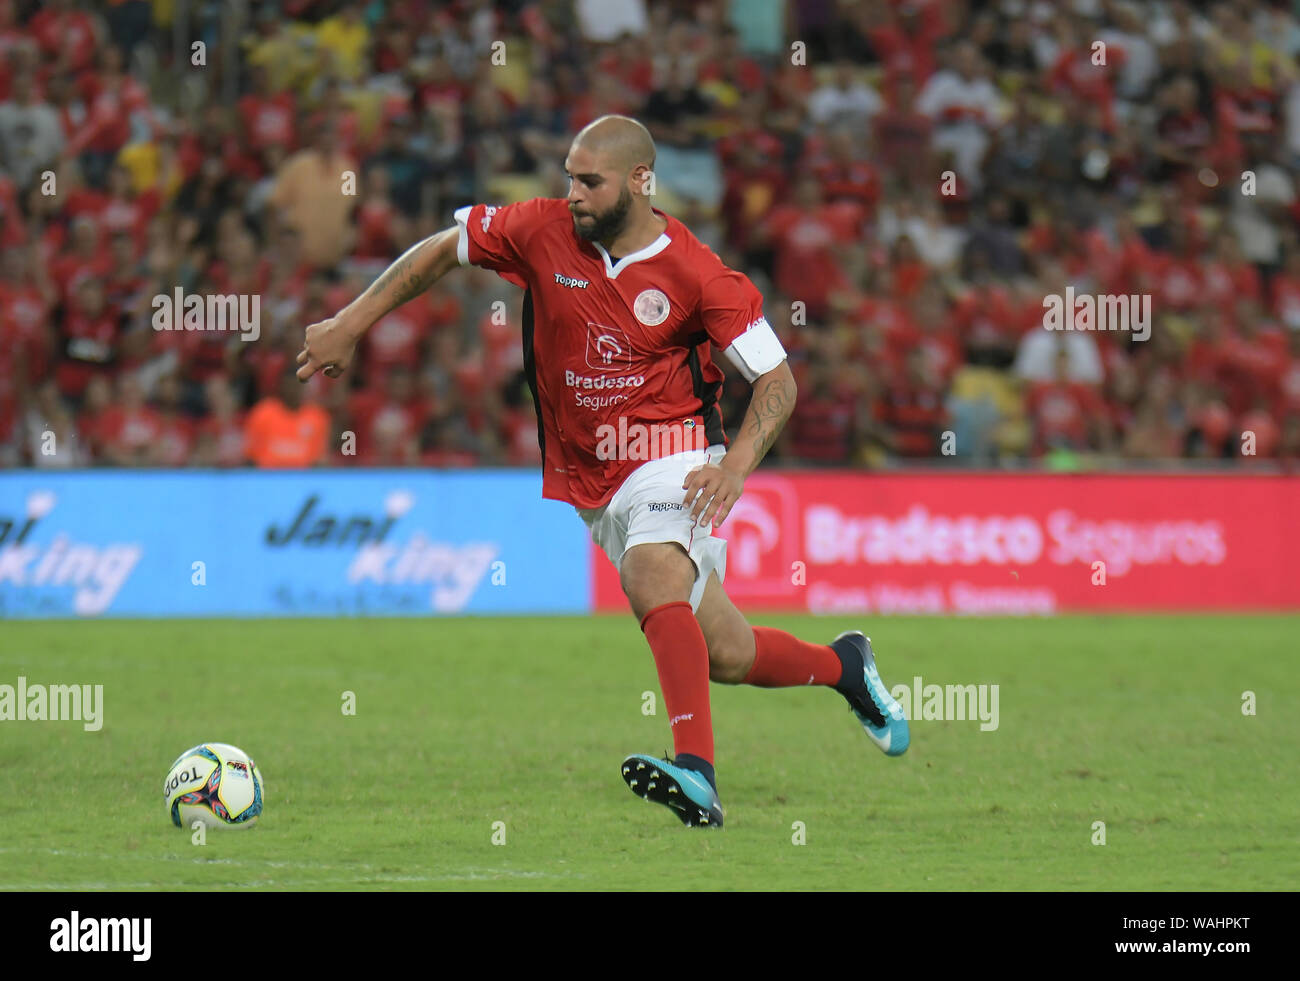 December 27, 2017. Player Adriano known as Emperor, during the friendly game of Stars in the stadium of the Maracanã in the city of Rio de Janeiro, Br Stock Photo